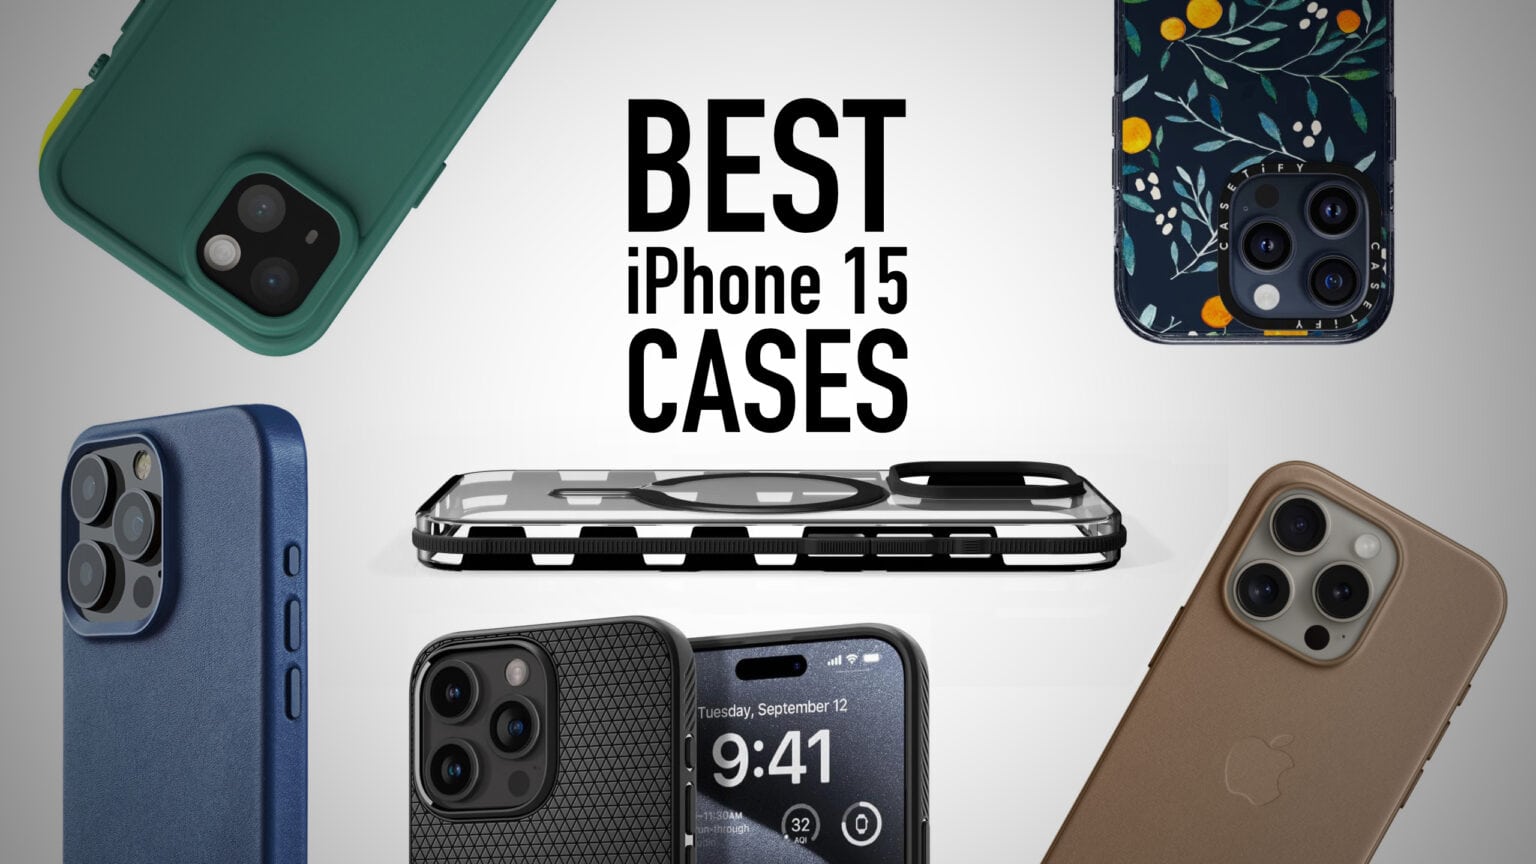 These are the best cases you can buy for iPhone 15 right now.